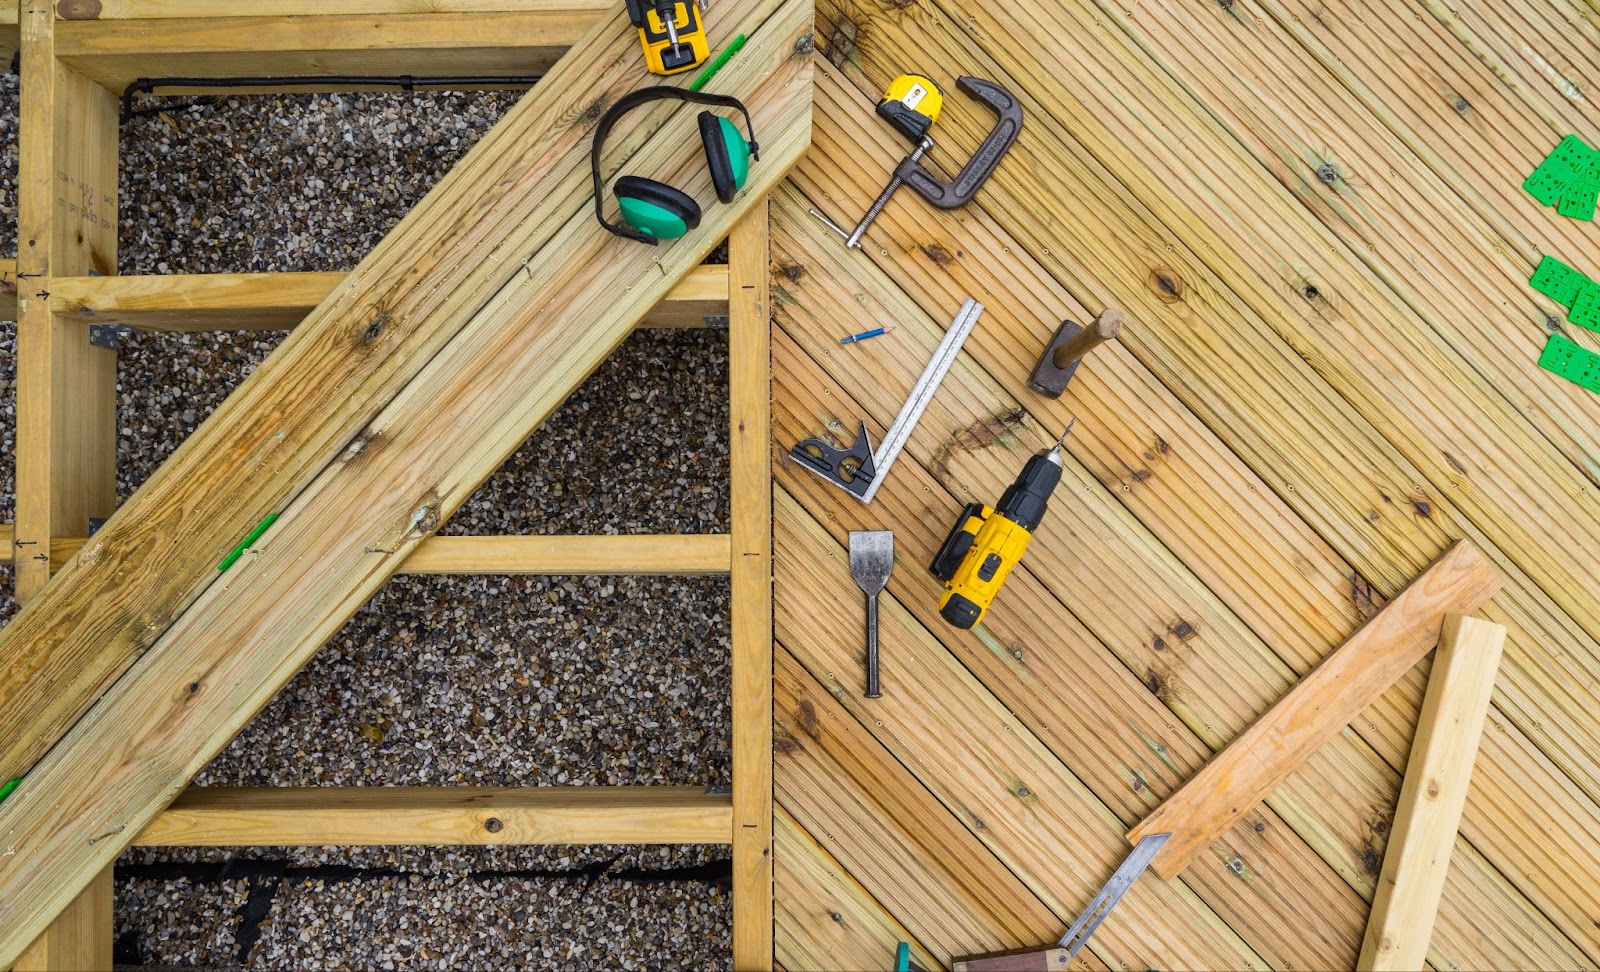 View from above of a wooden deck with various tools laying atop.